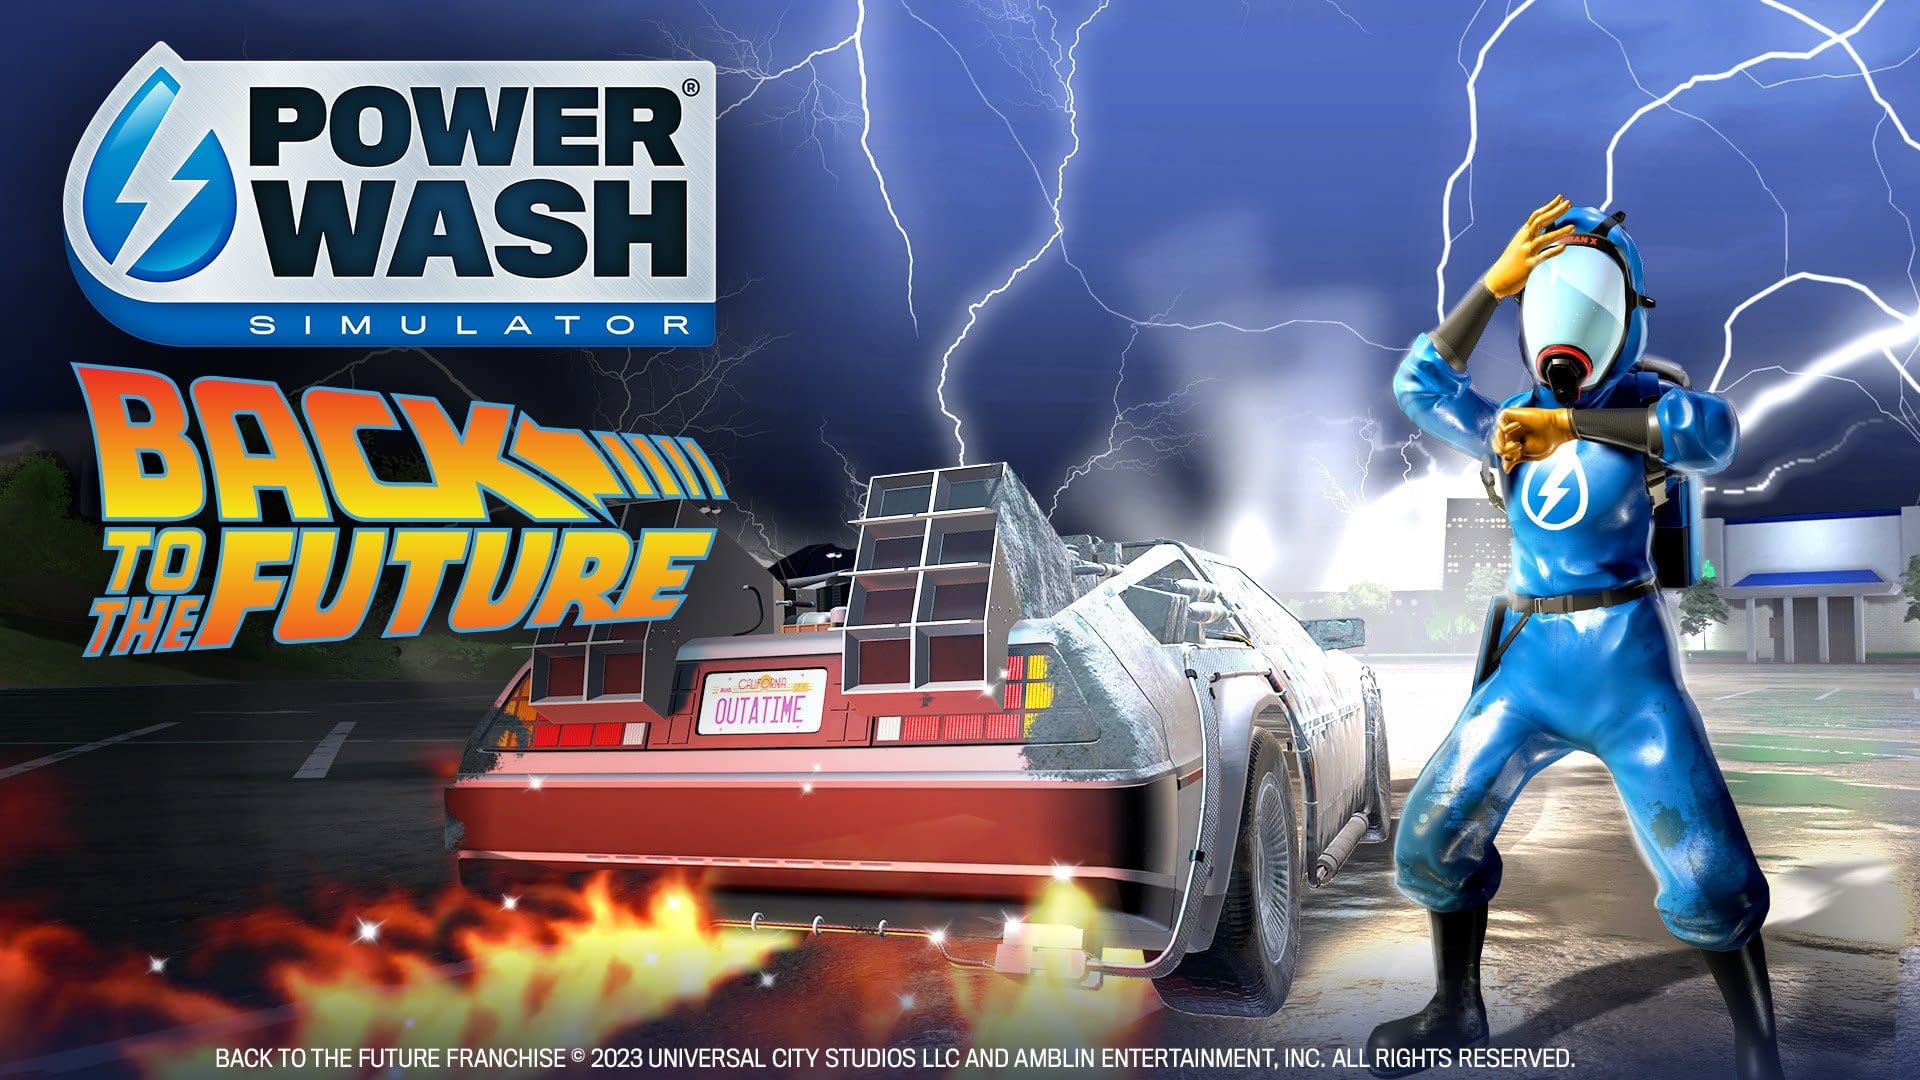 Back to the Future Business Association Pack for Powerwash Simulator